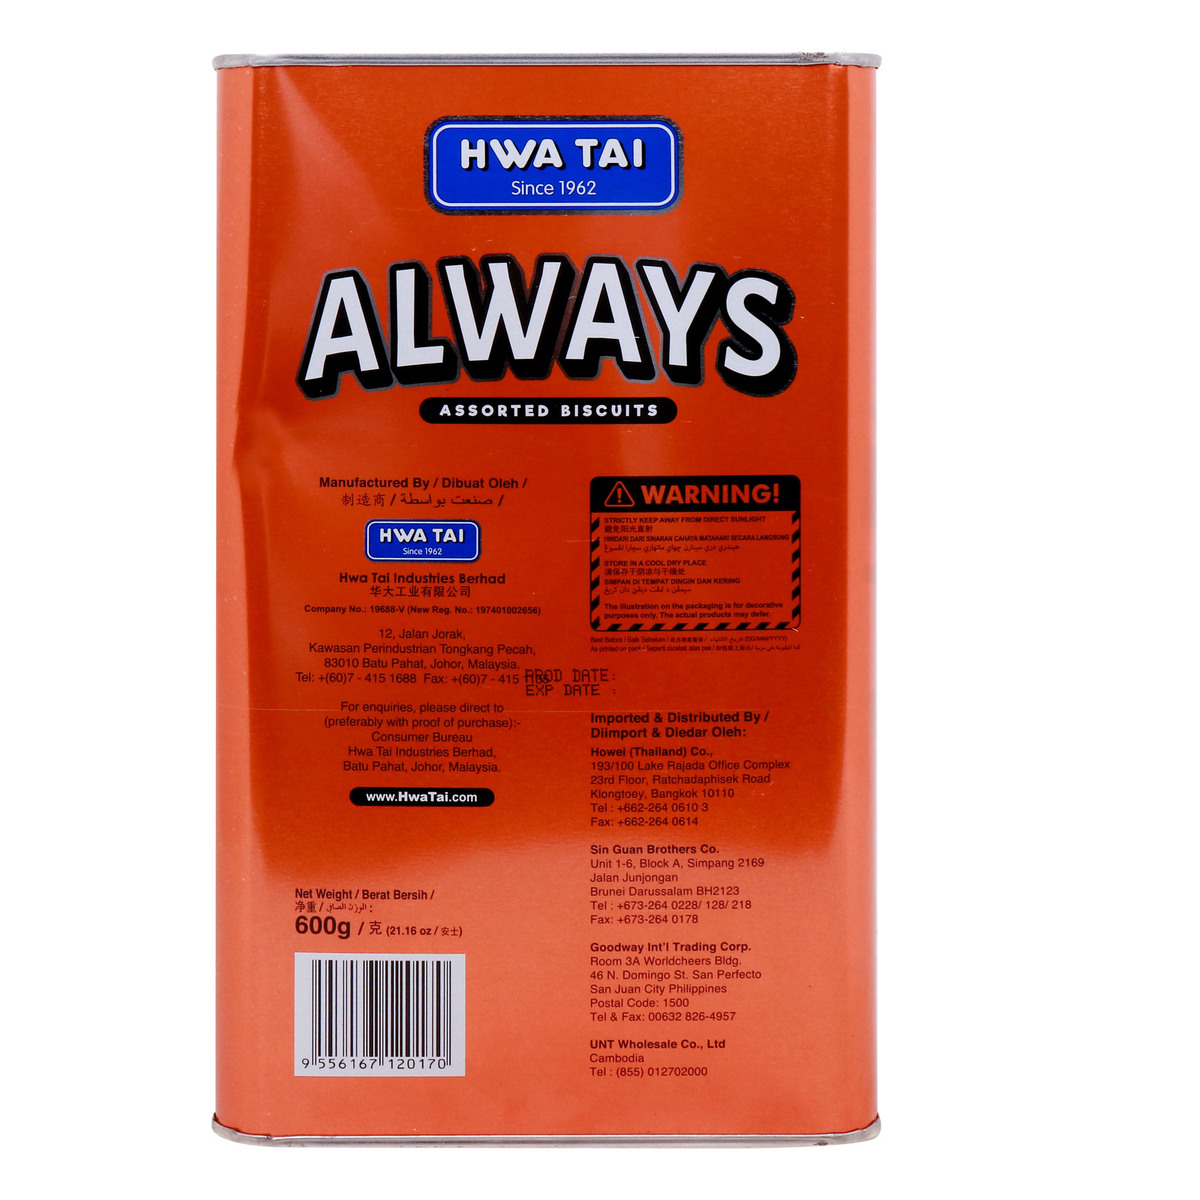 Hwa Tai Always Assorted Biscuits Tin, 600 g